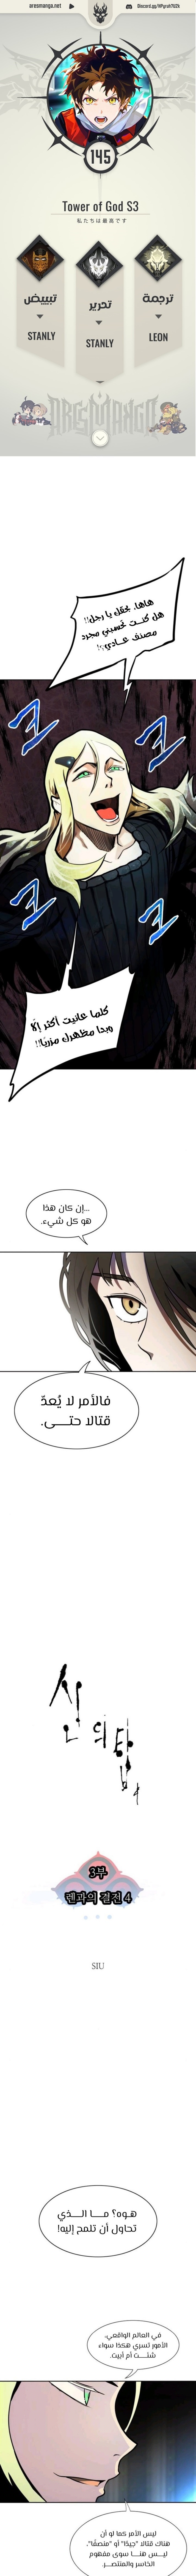 Tower of God S3: Chapter 145 - Page 1